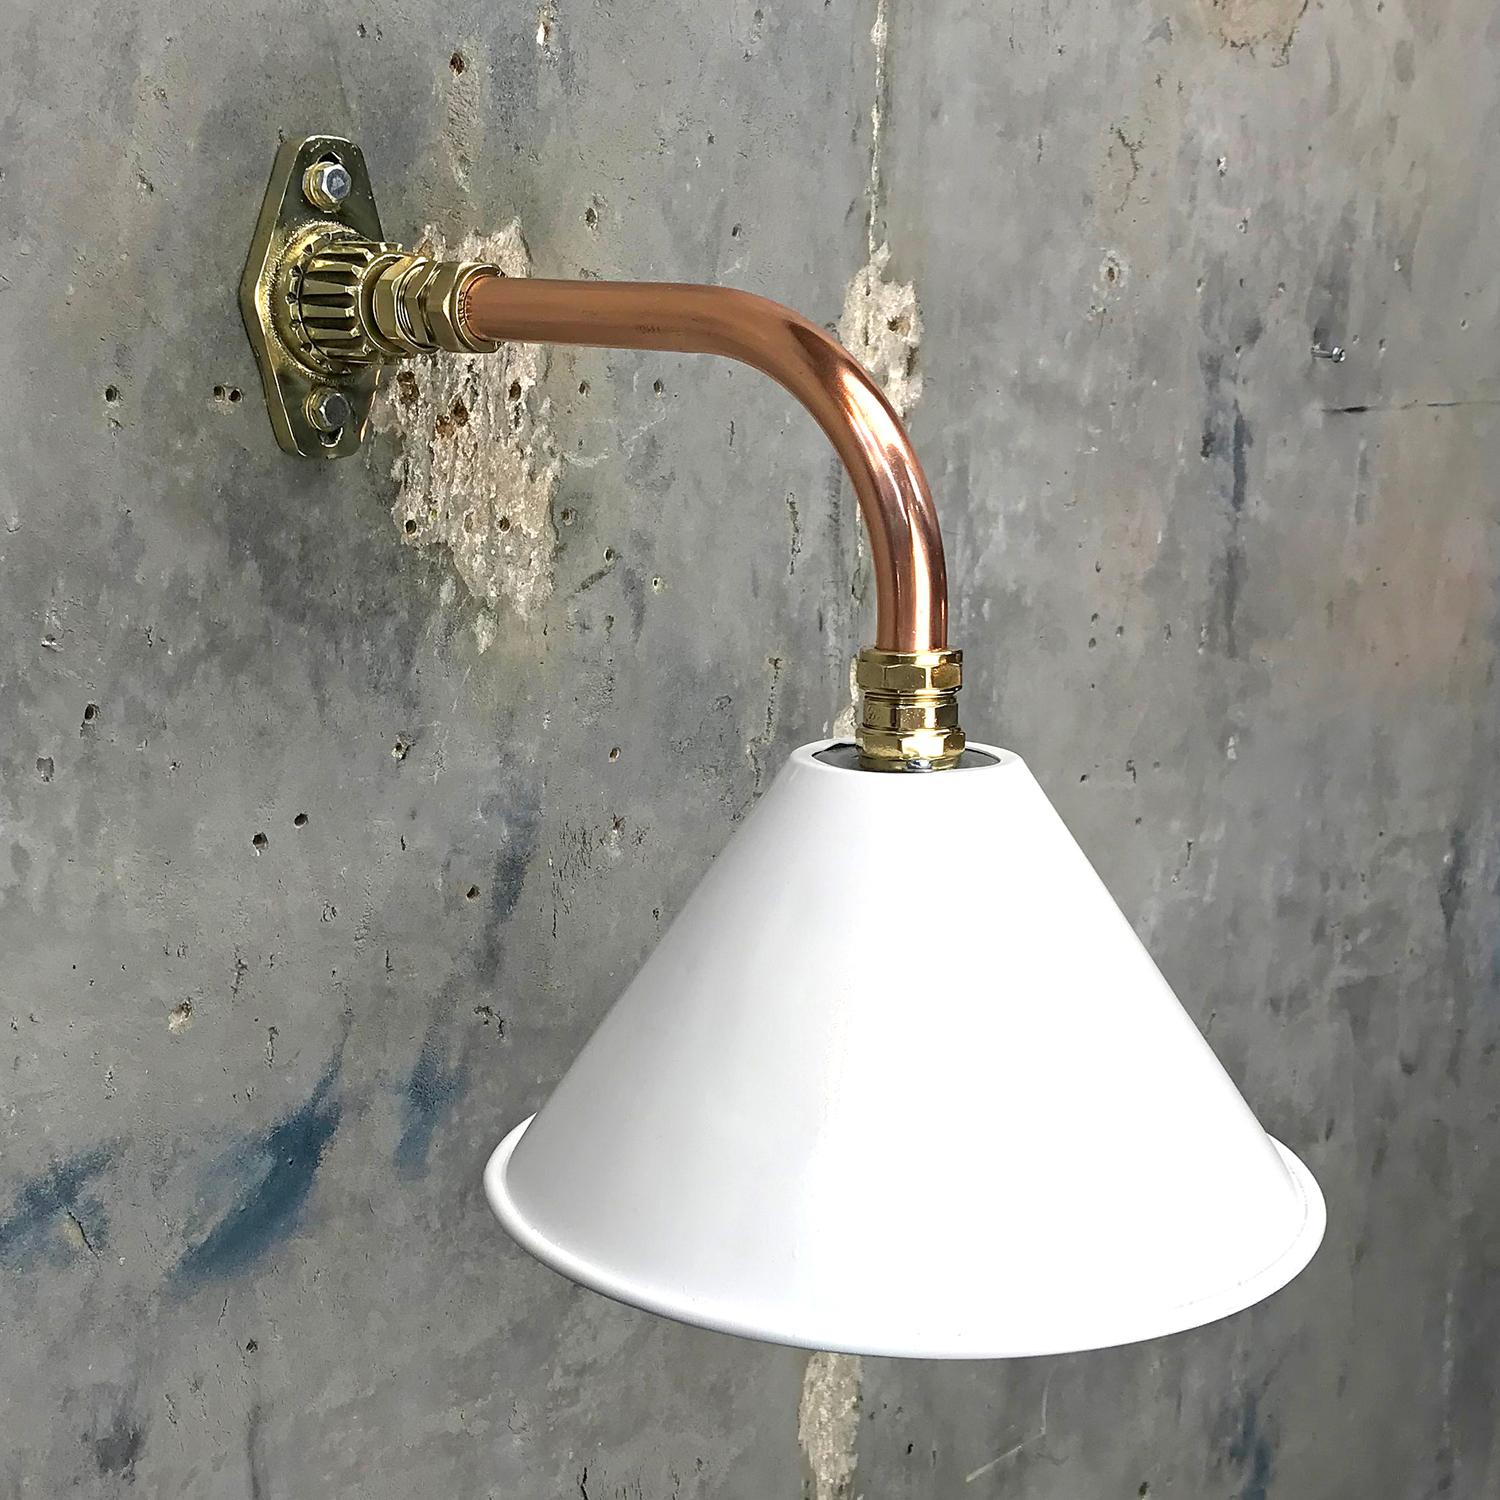 Ex British army festoon lamp shade fitted to a copper and brass cantilever fitting.

We have fabricated a copper and brass cantilever wall mount and we can offer customised dimensions for the reach of the lamp from the wall, we can also finish the